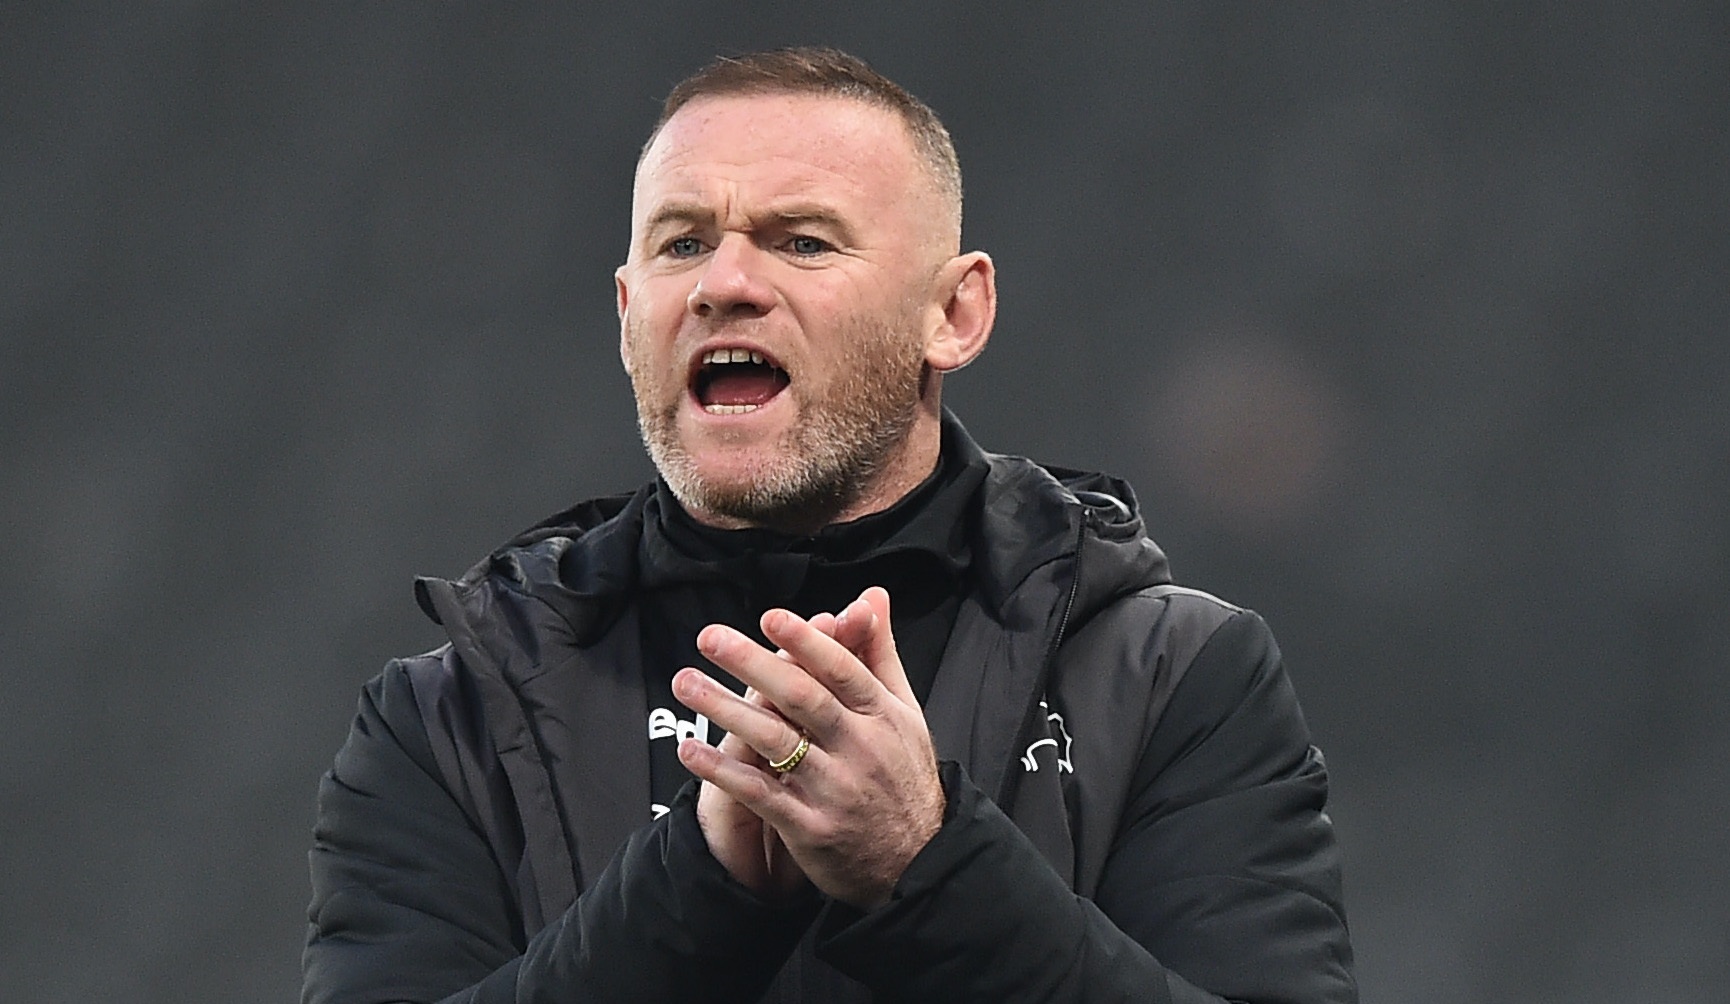 Wayne Rooney predicts who will win the Premier League this season